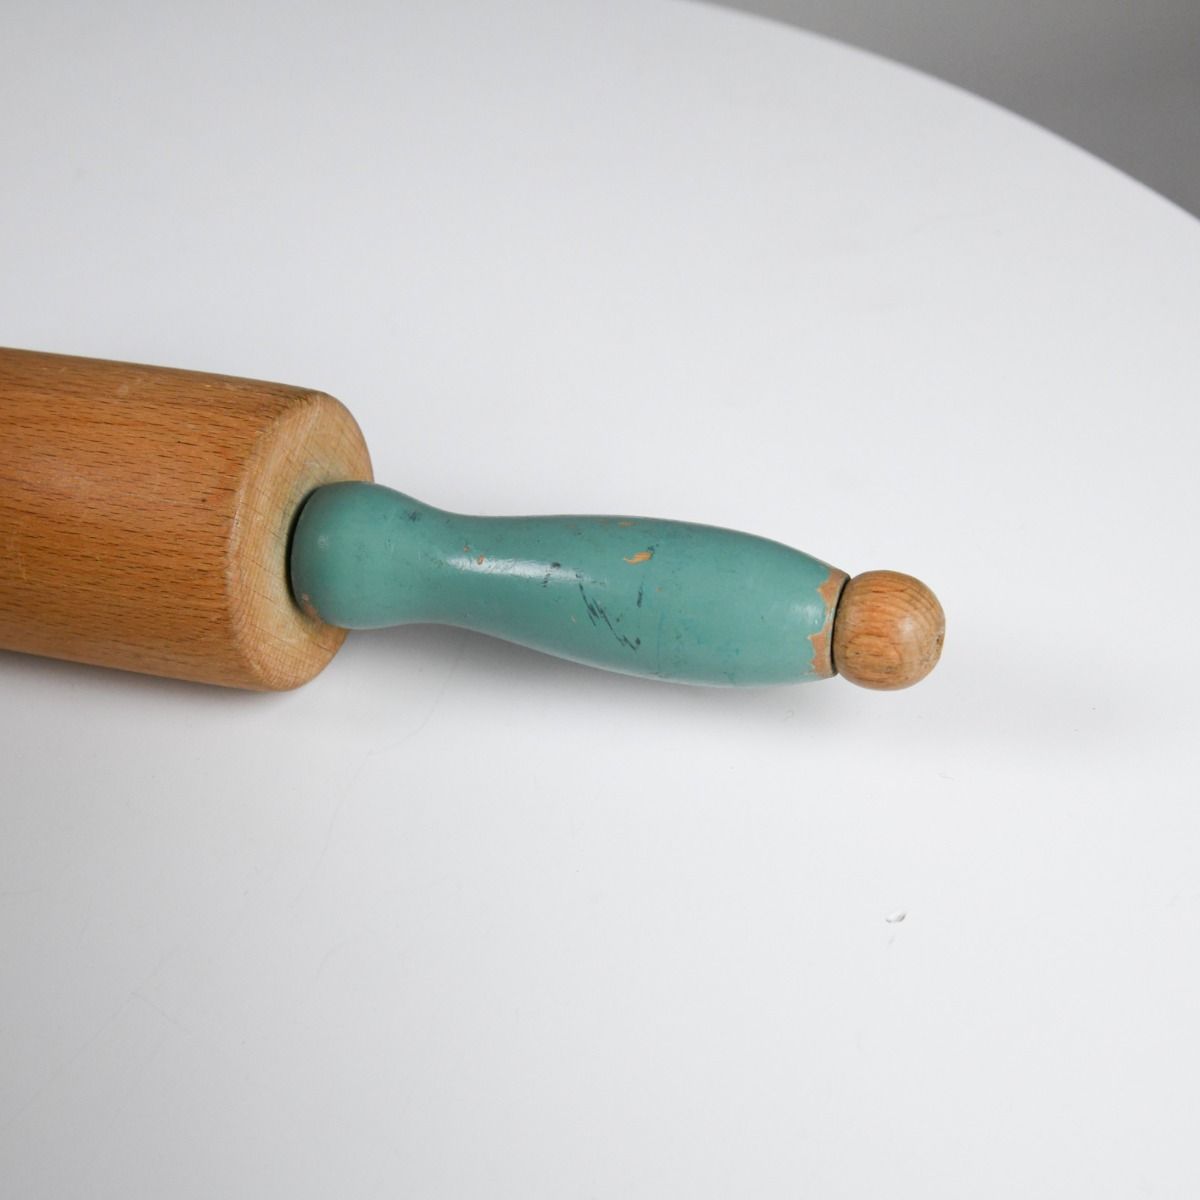 Vintage 1950s Wooden Rolling Pin